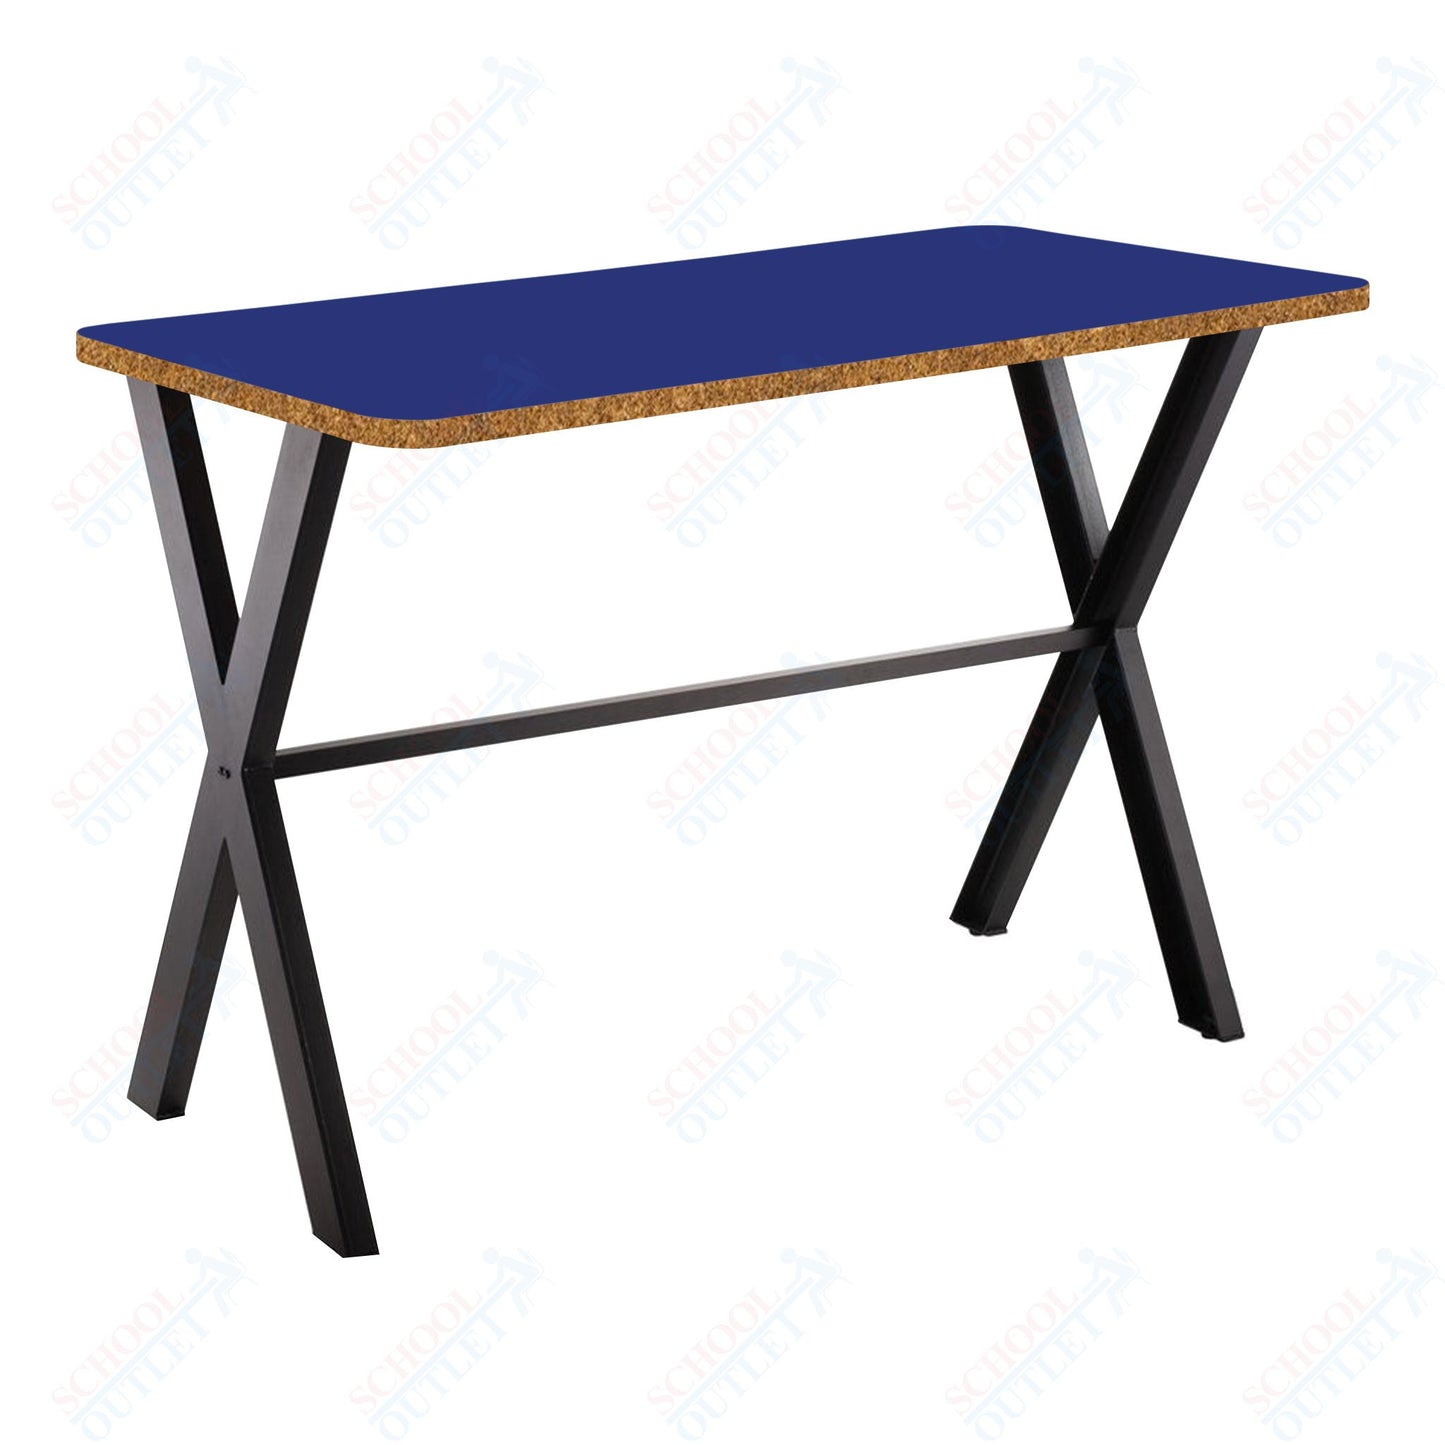 NPS CLT3060B2 - Collaborator Table, 30"x 60" Rectangle, 42" Height w/ Crossbeam, High Pressure Laminate Top (National Public Seating NPS-CLT3060B2)